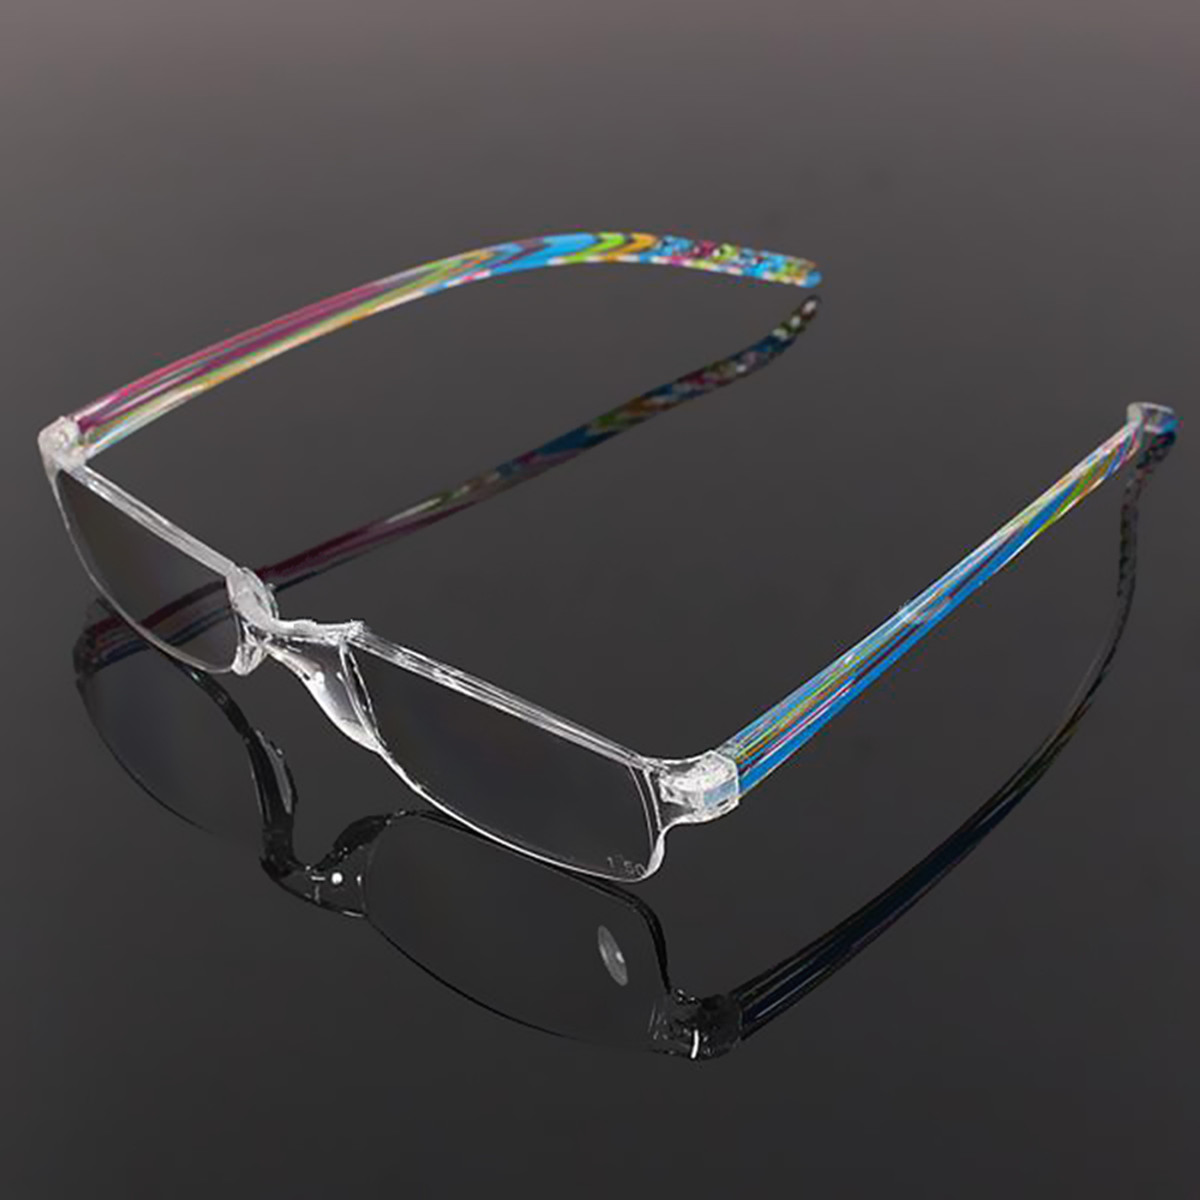 Light Weight Portable Rimless Magnifying Reading Glasses Fatigue Relieve Strength 1.0 1.5 2.0 2.5 3.0